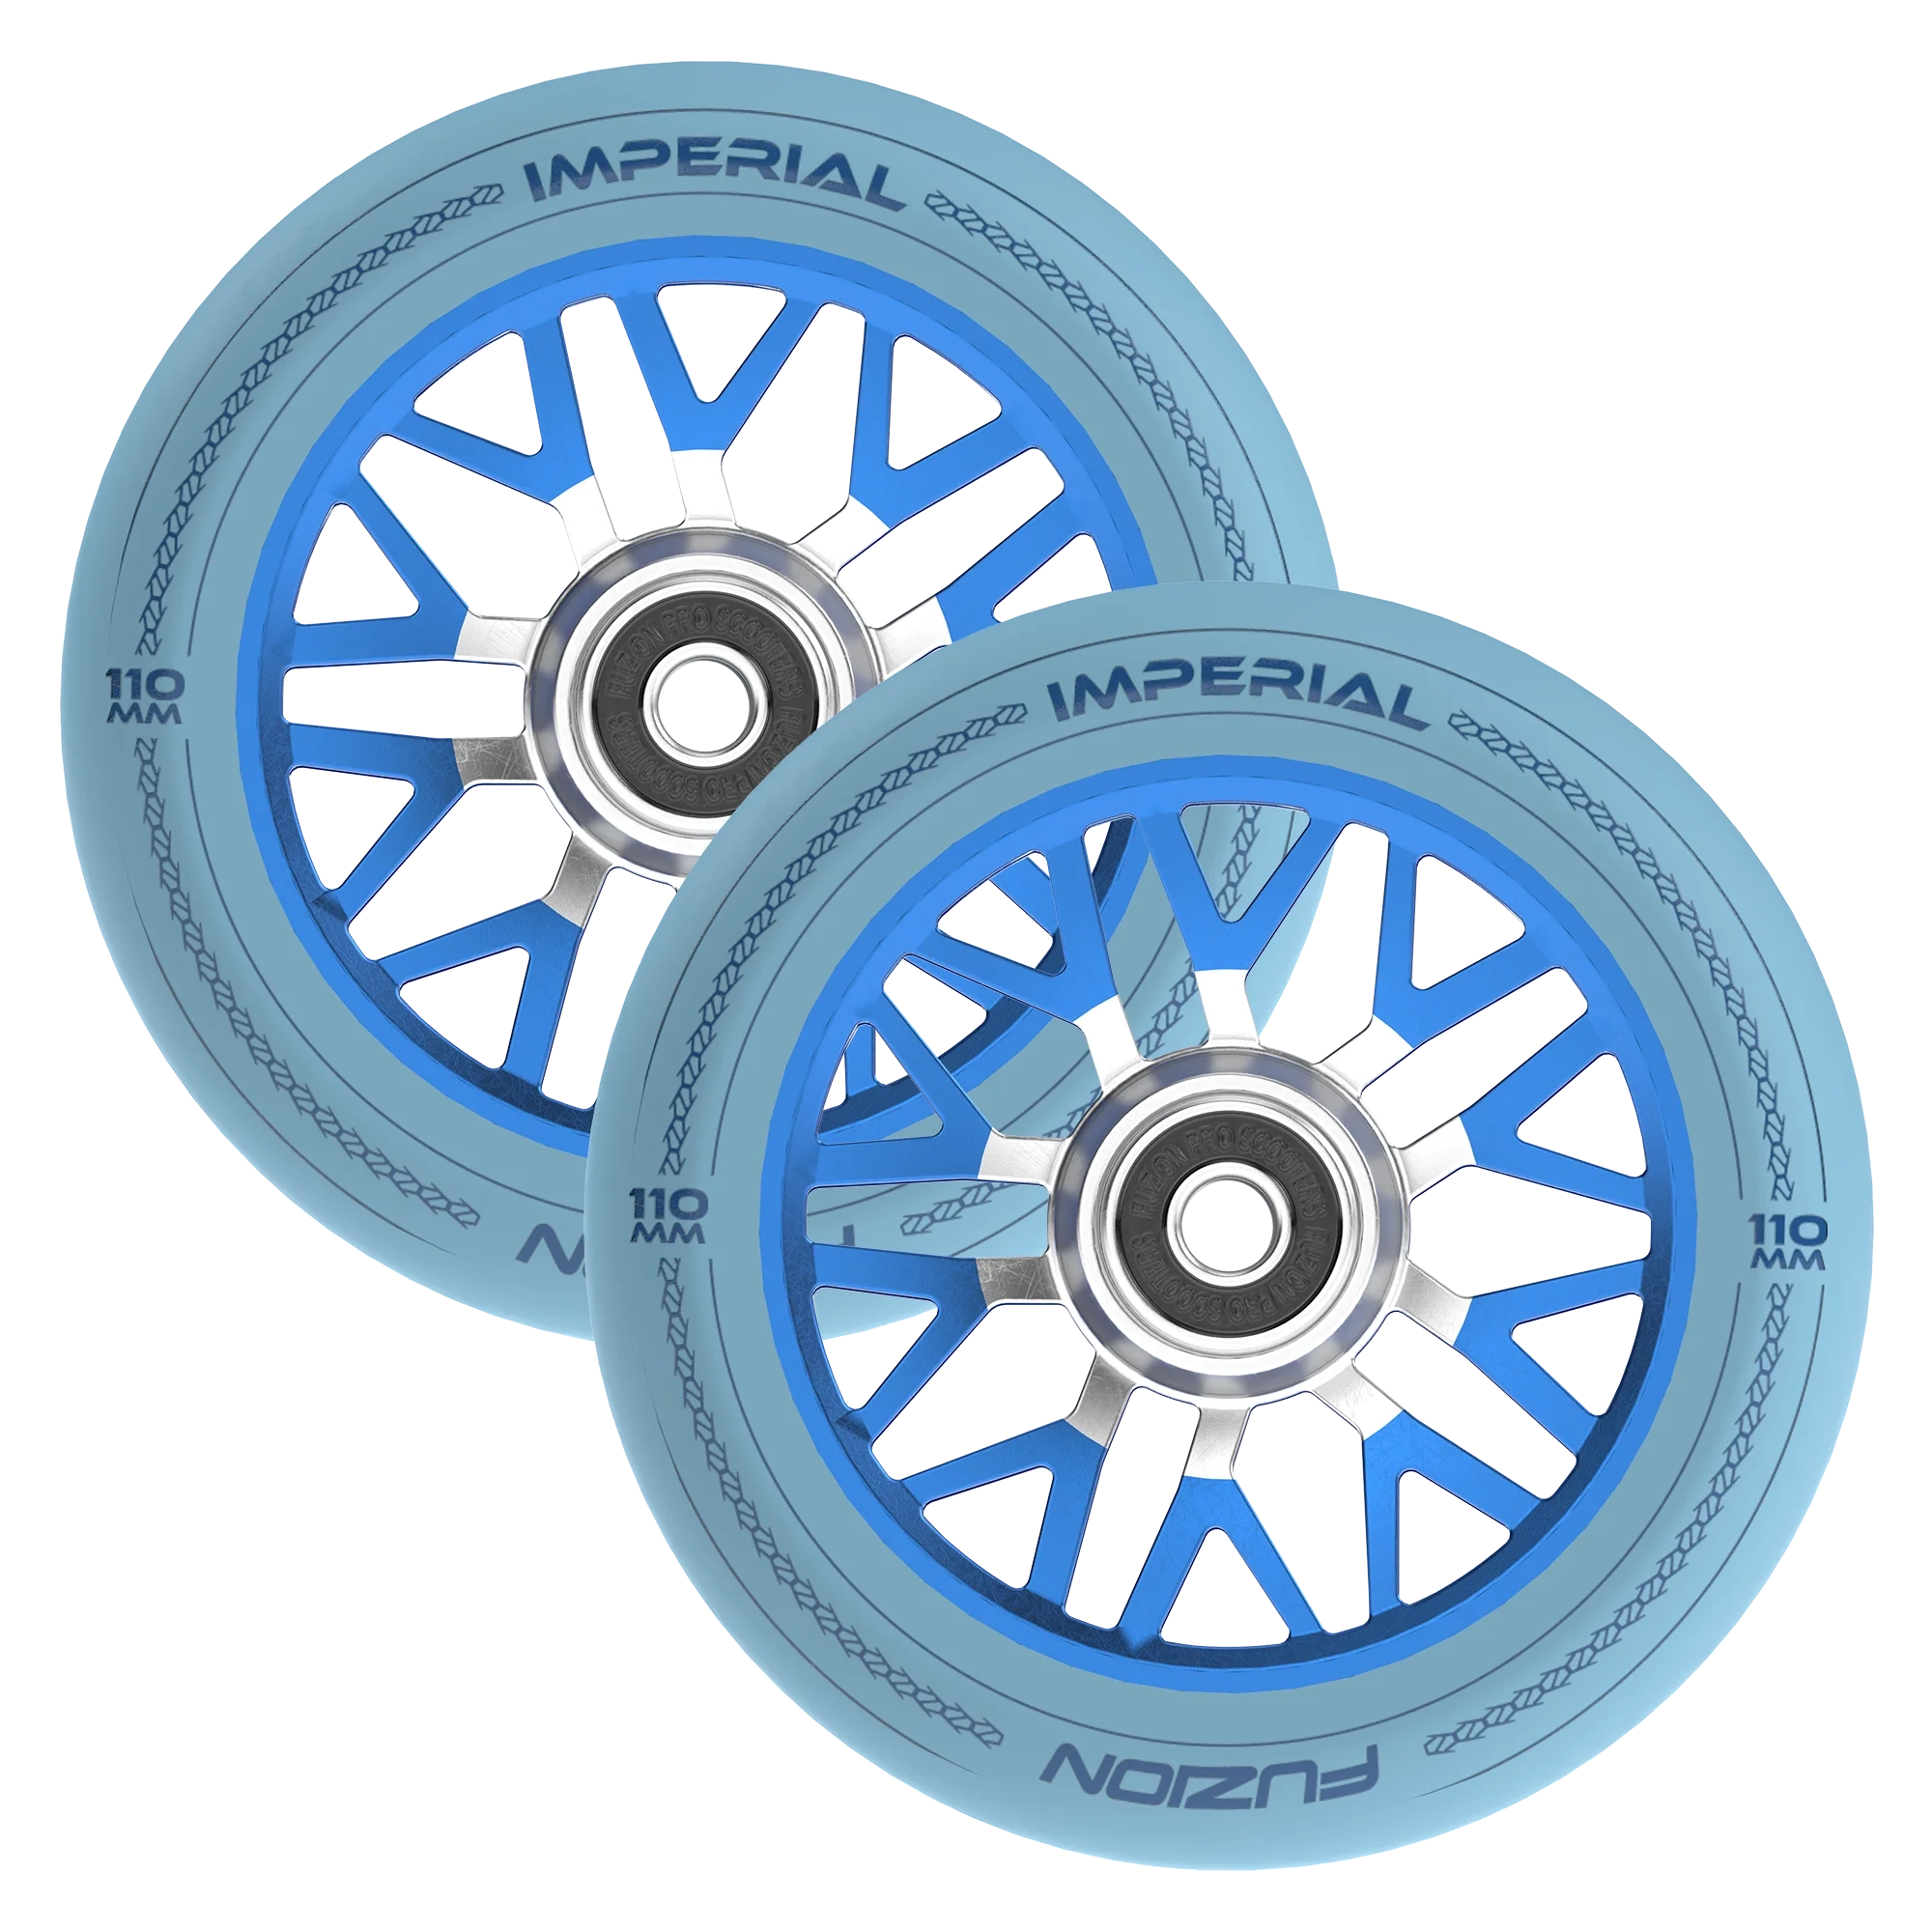 Fuzion Wheels Imperial 110mm 2-pack